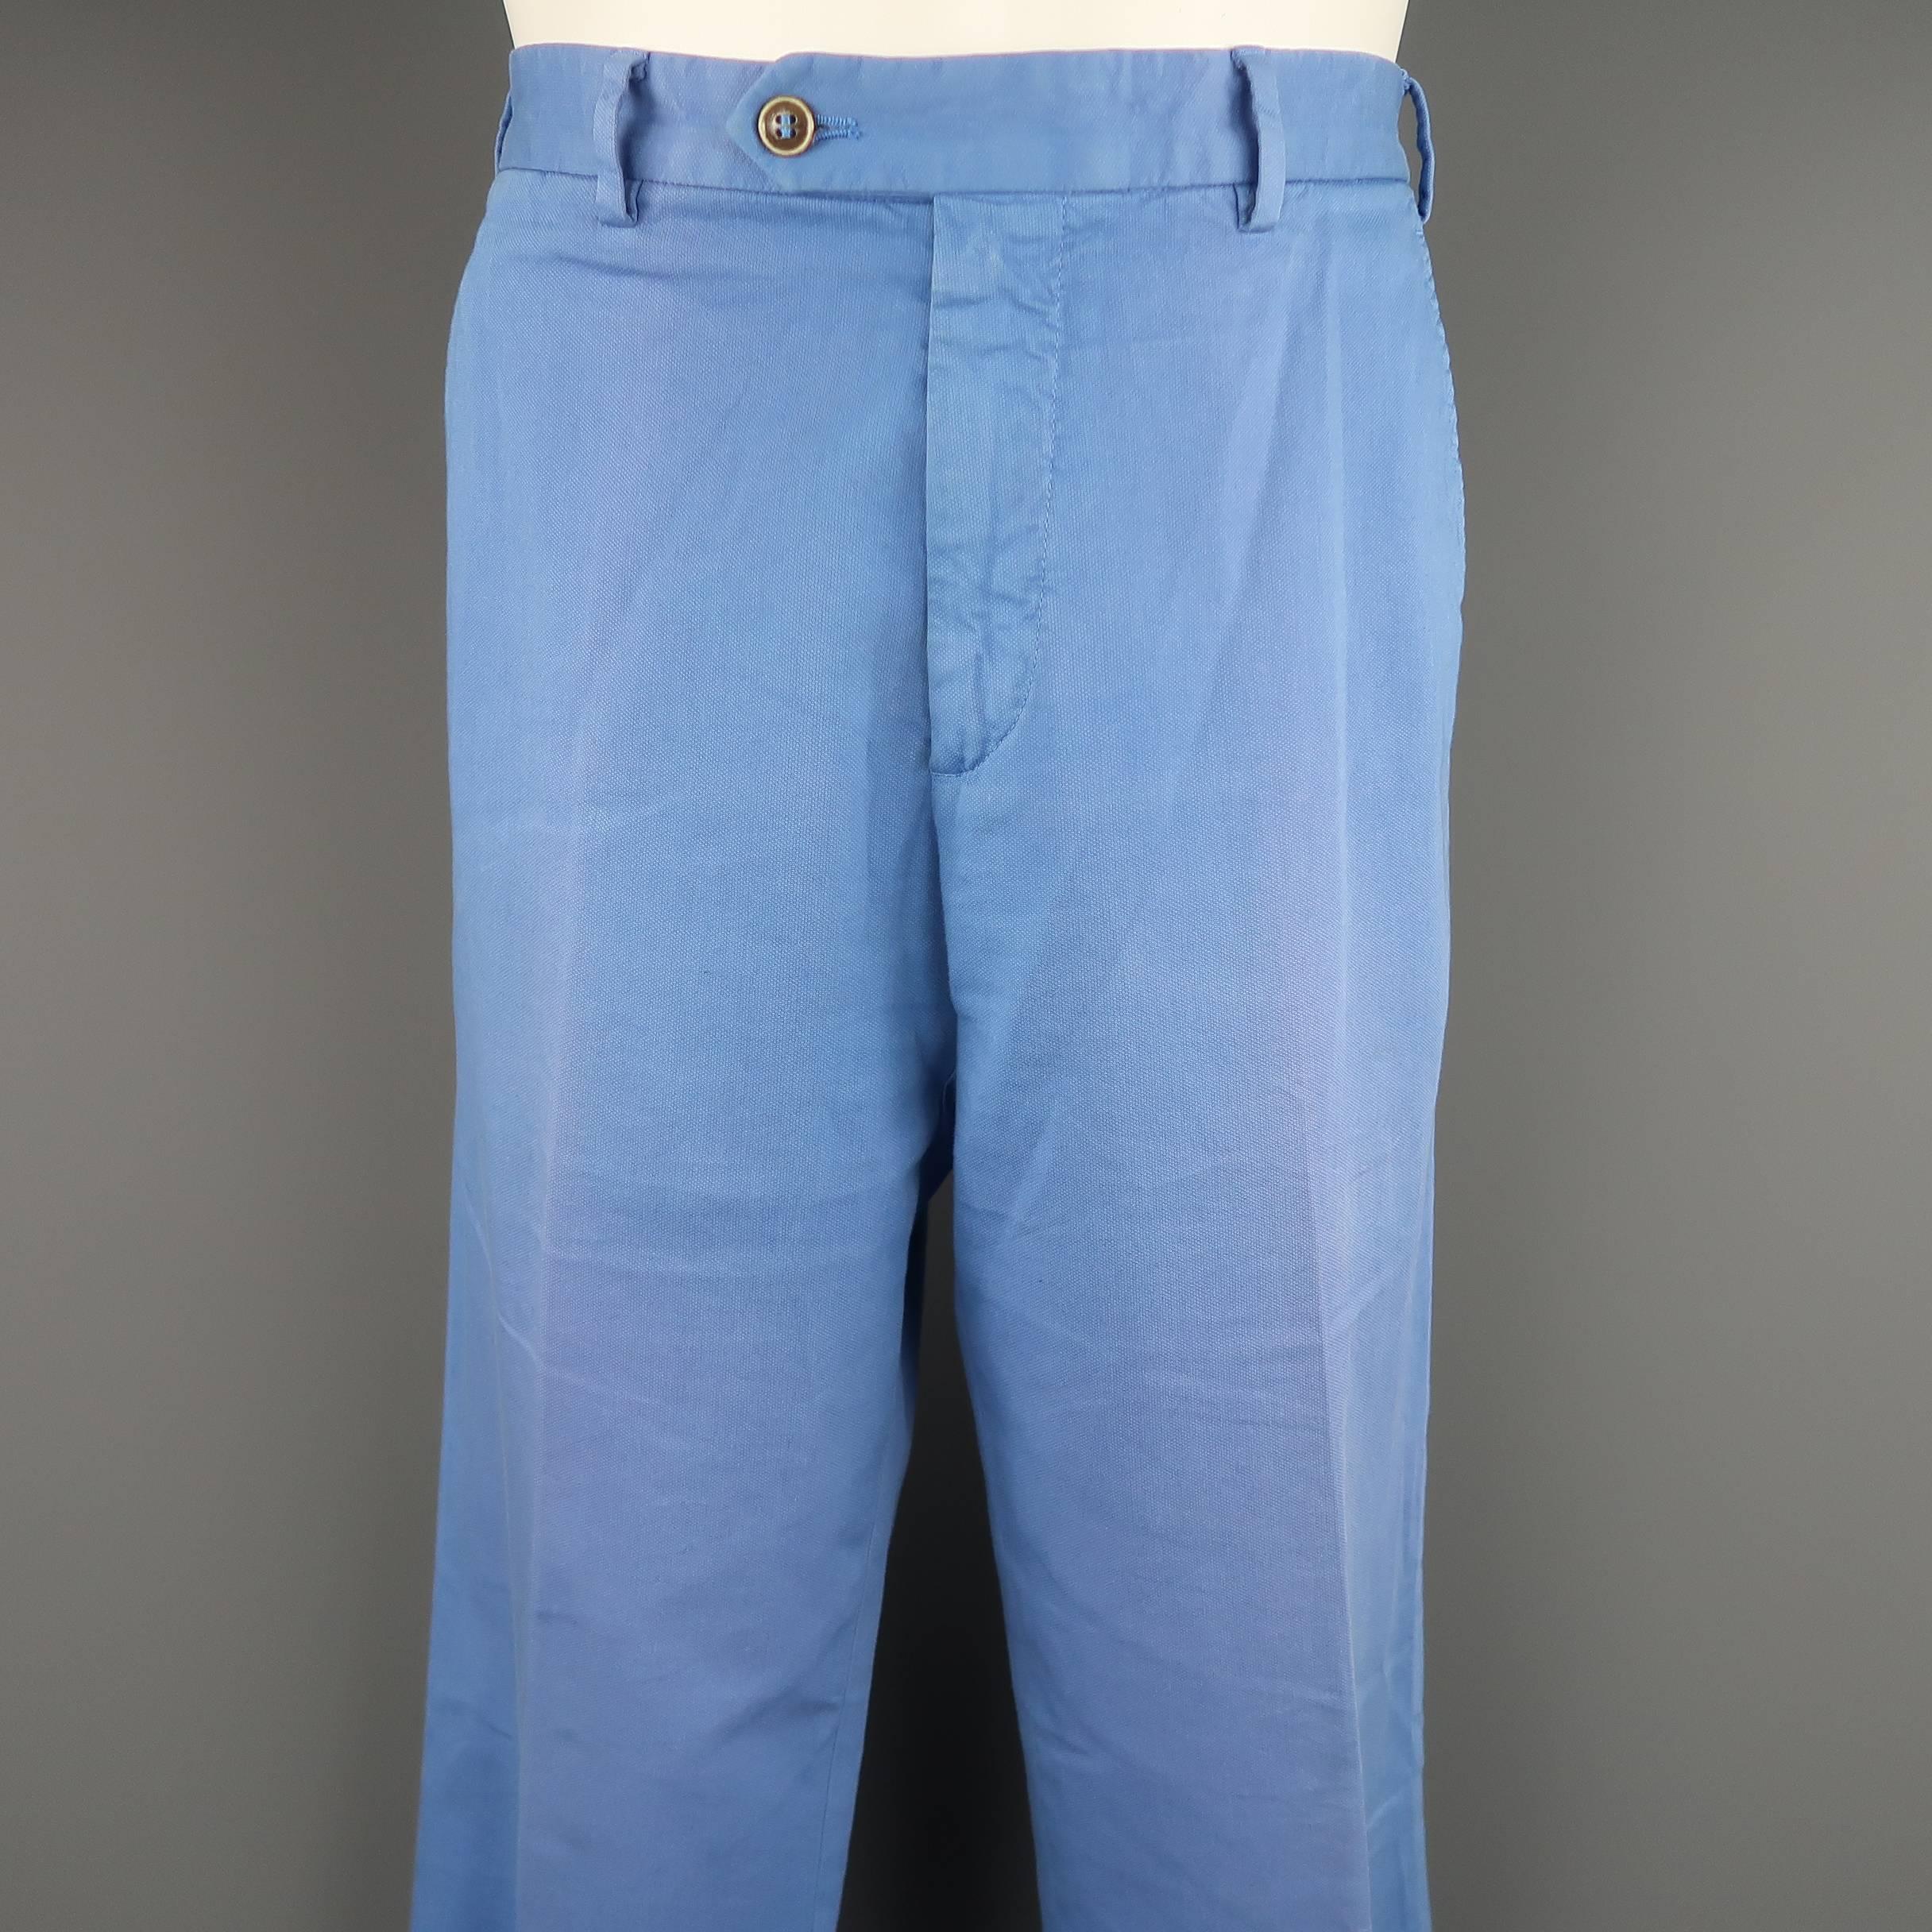 LORO PIANA chino pants come in sky blue cotton canvas with a classic fit. Discoloration throughout. As-is. Made in Italy.
 
Fair Pre-Owned Condition.
Marked: IT 50
 
Measurements:
 
Waist: 34 in.
Rise: 10 in.
Inseam: 34 in.
